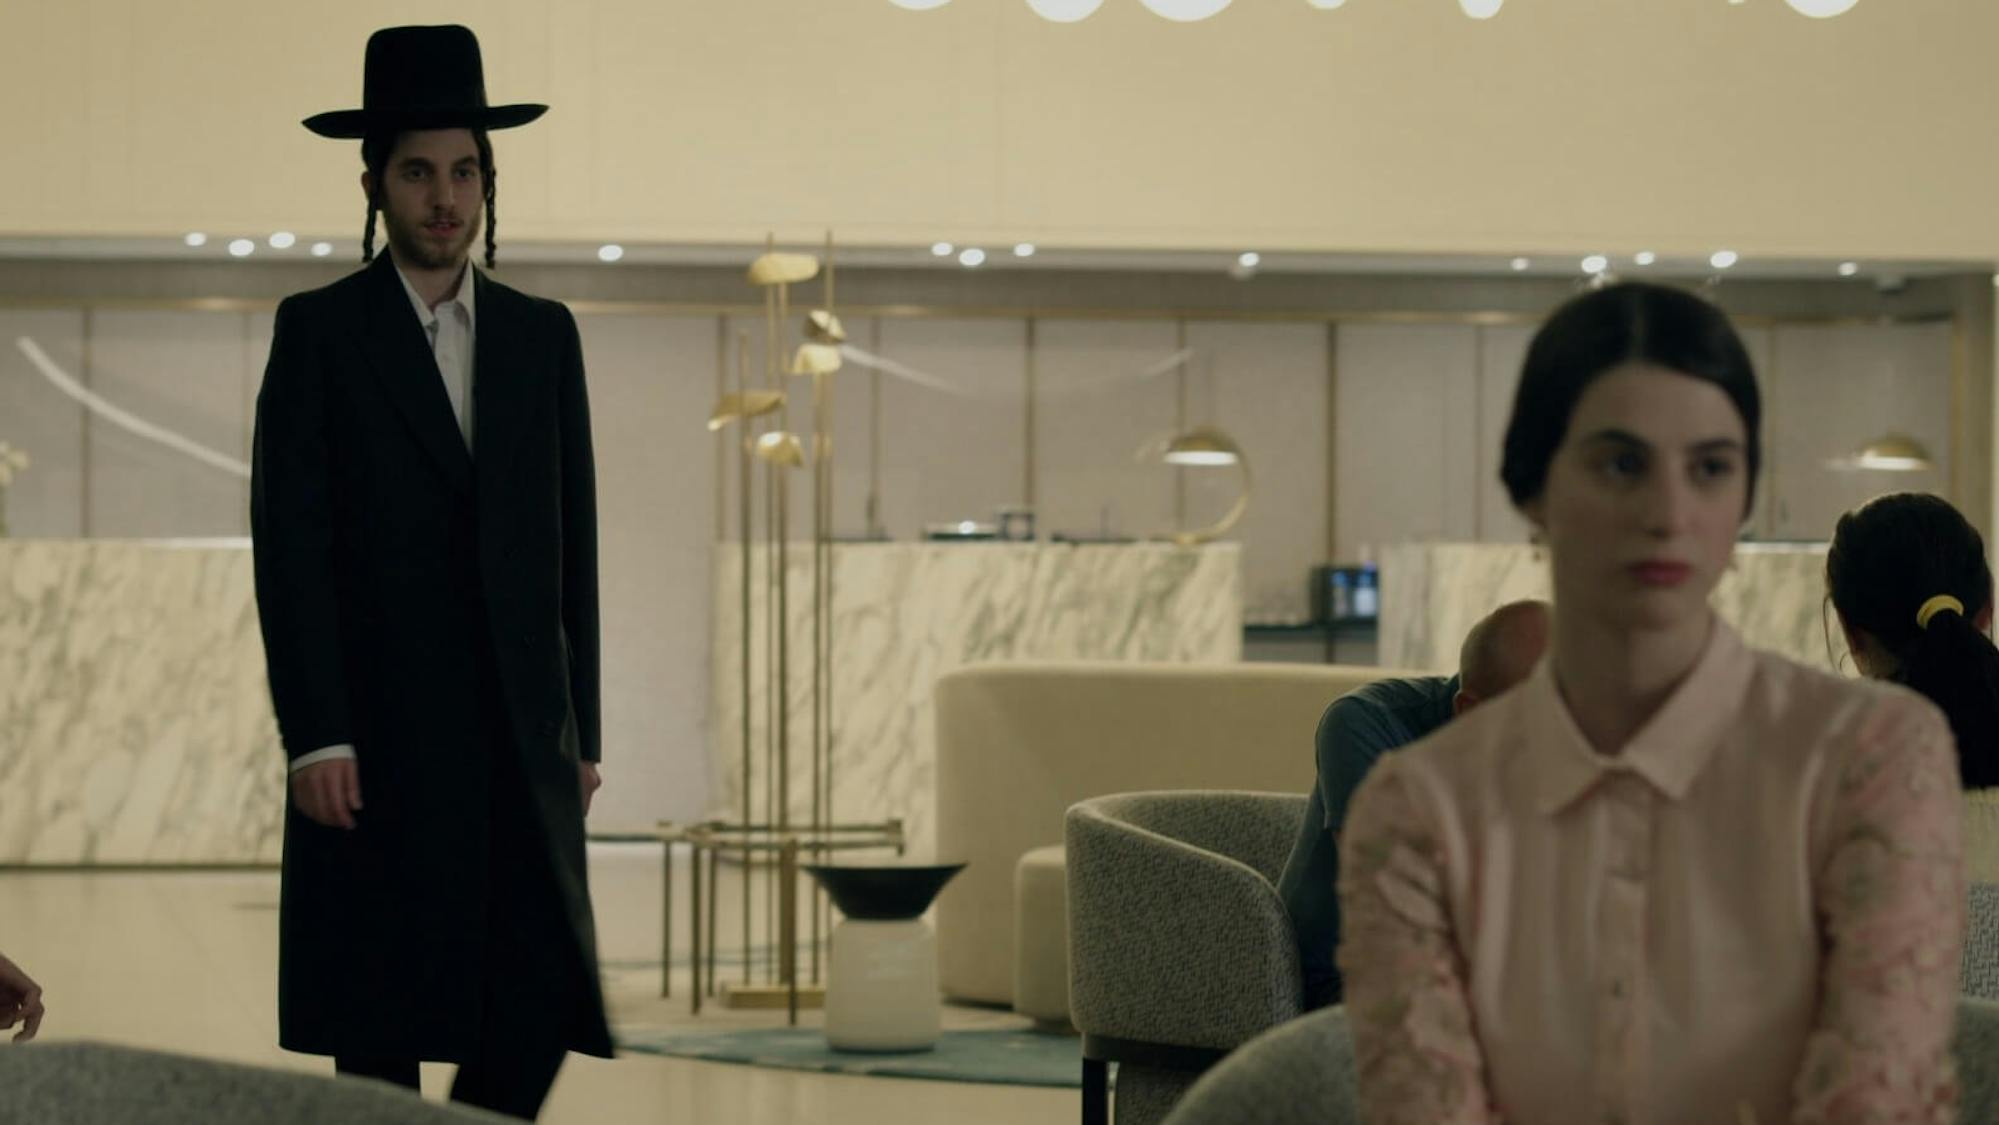 A man in a black coat and hat stands in the background looking at a woman in a pink blouse in the foreground, who seems unaware of his presence. The room is a hotel lobby and is scattered with small grey chairs, marble, and light fixtures.